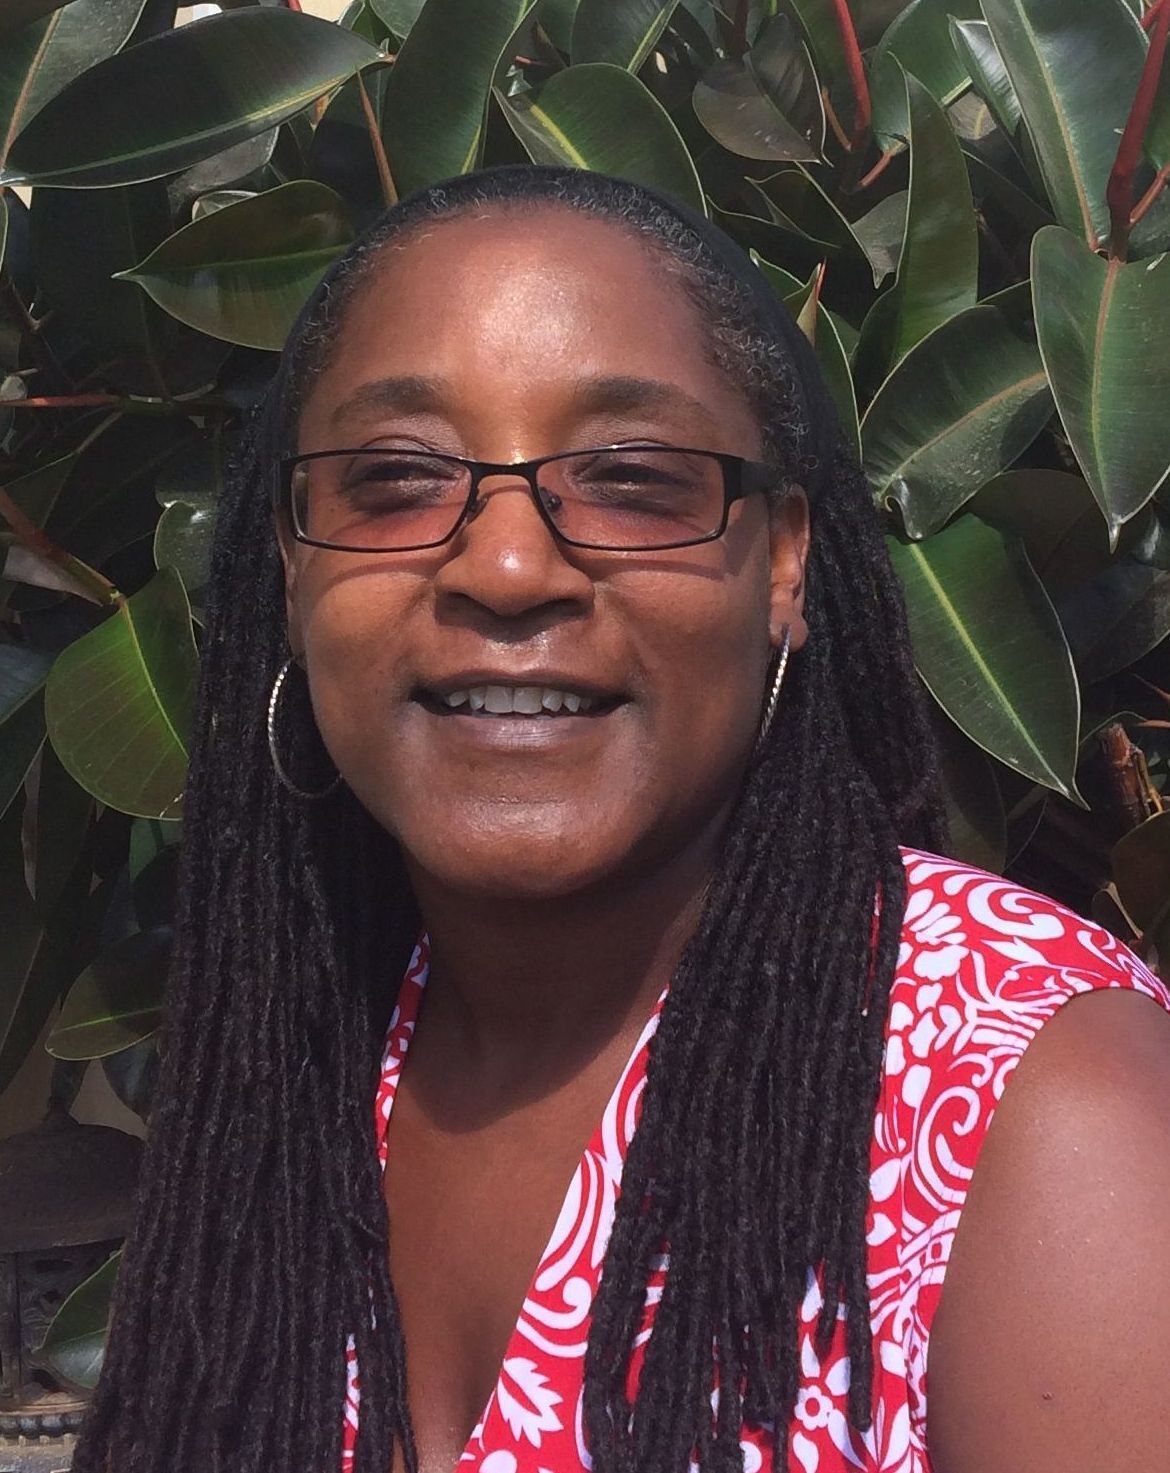 A woman wearing glasses and dreadlocks is smiling in front of a plant.